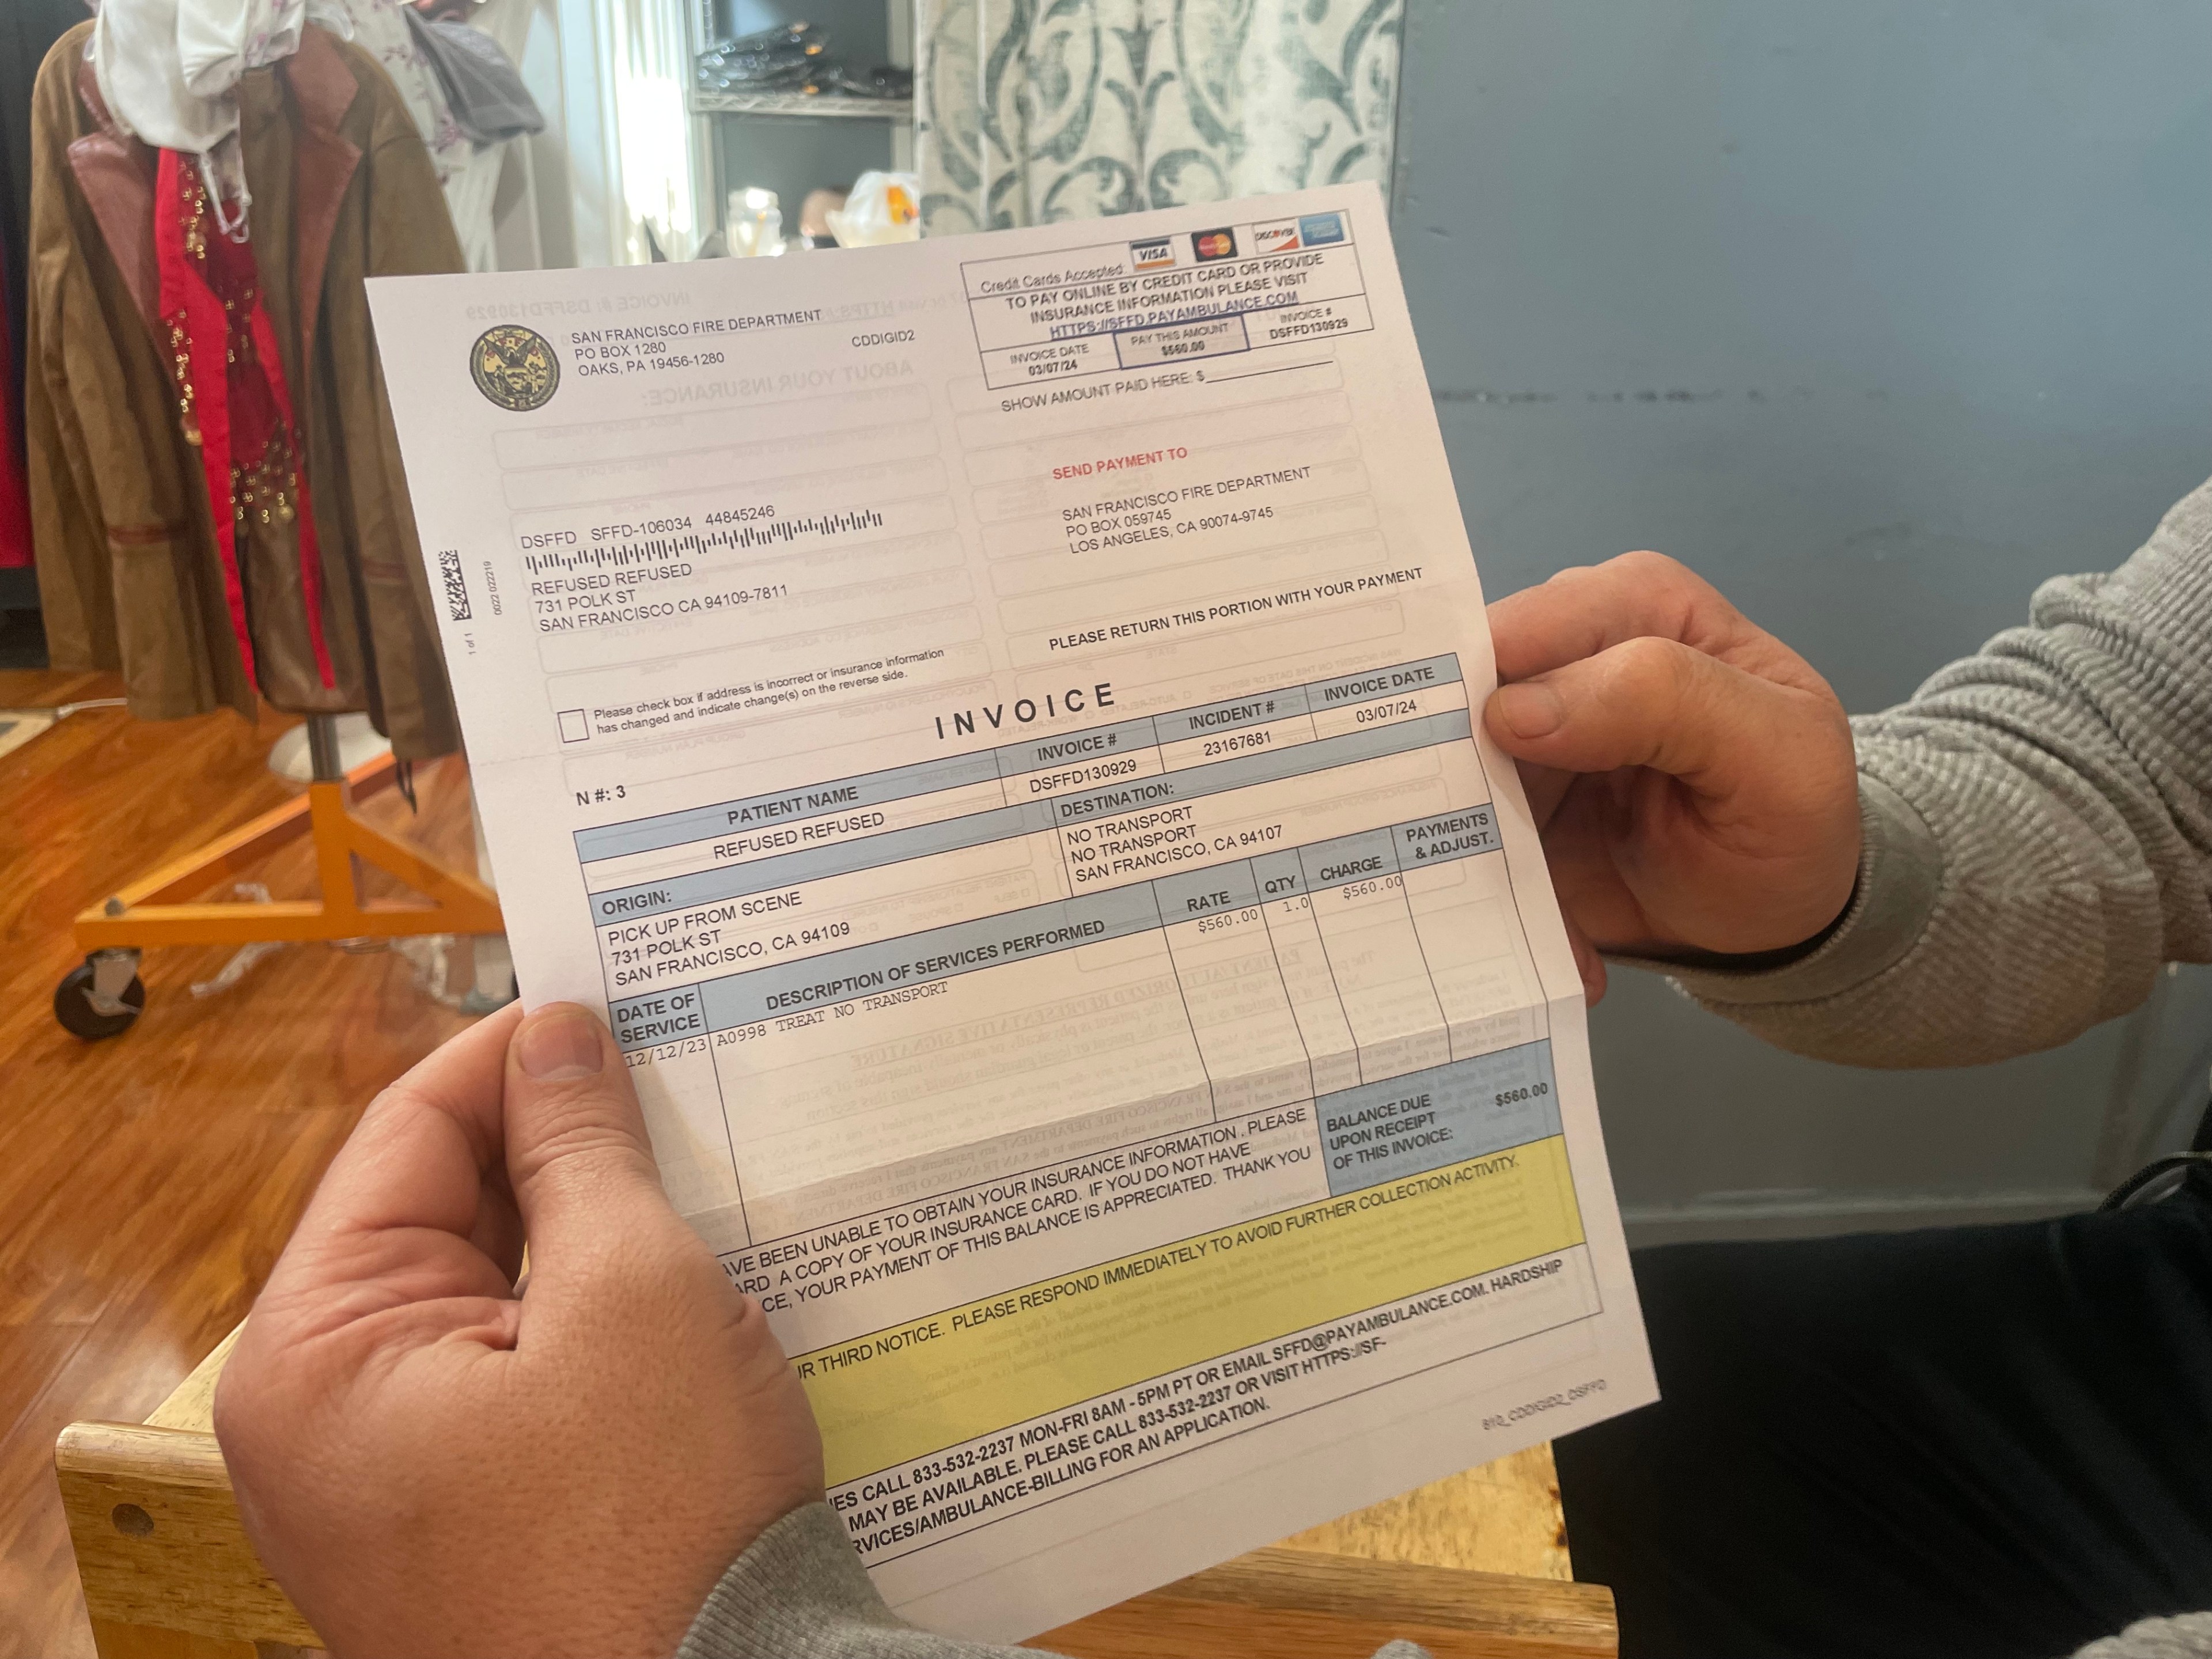 A person is holding an ambulance service invoice from the San Francisco Fire Department.